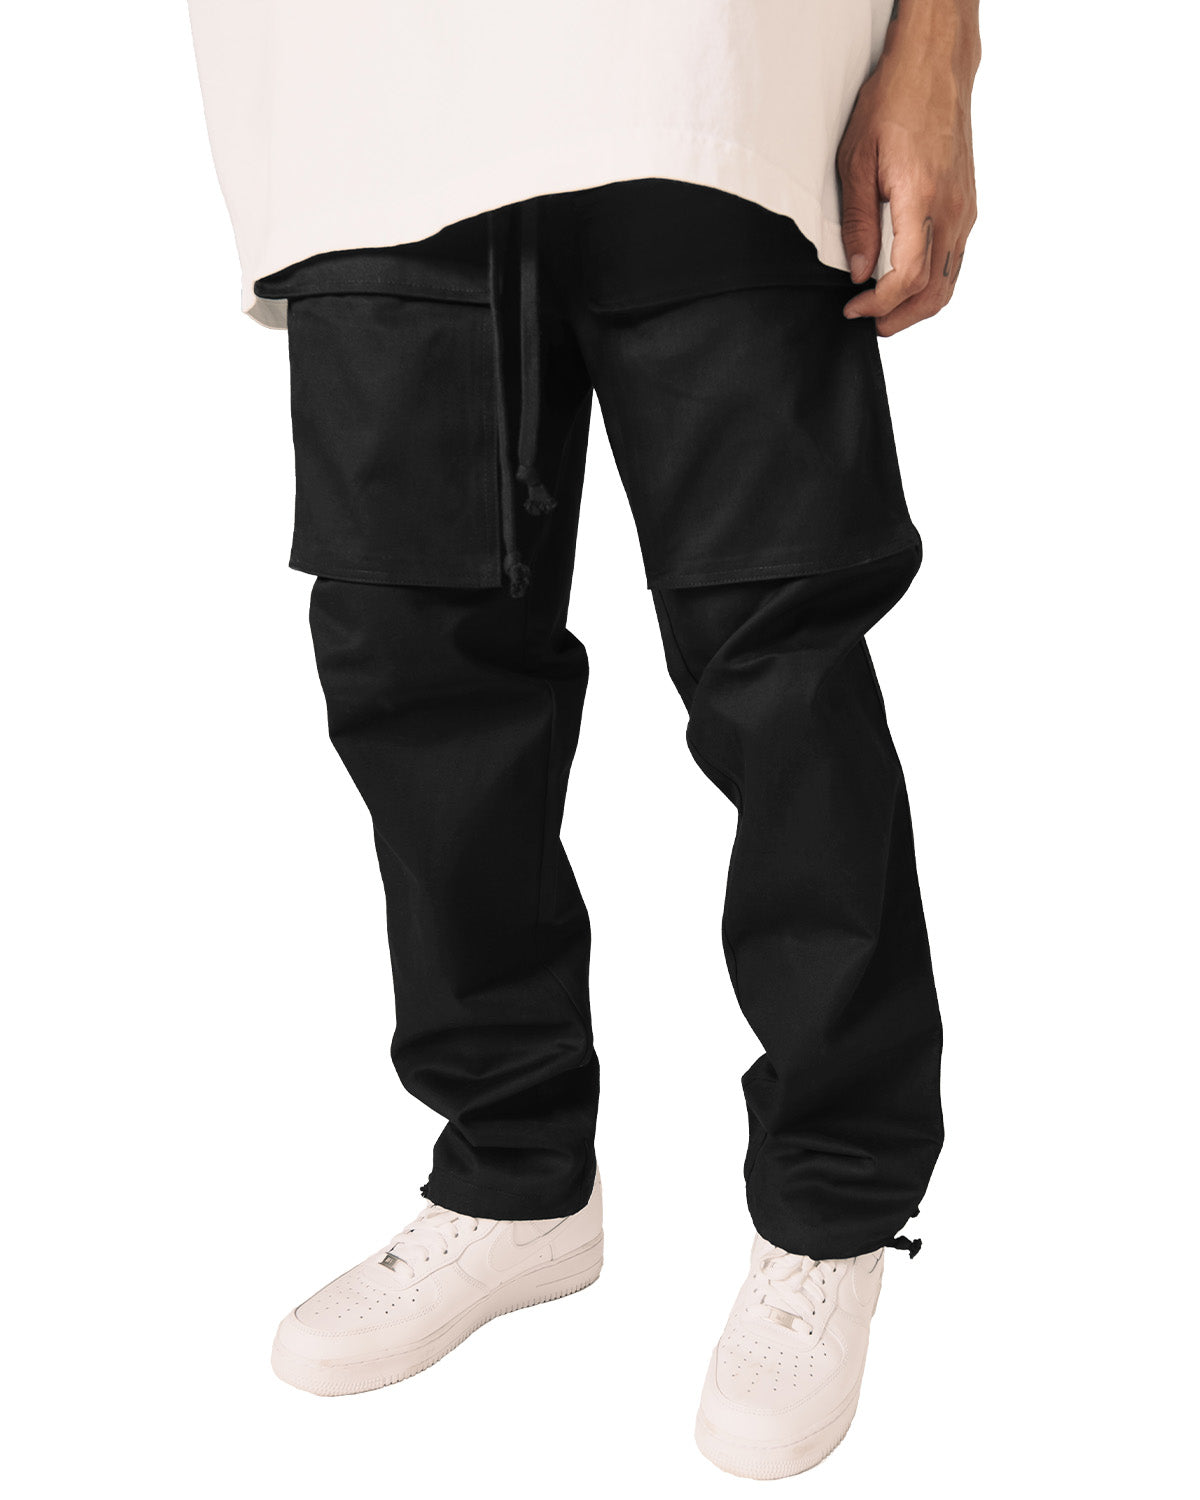 Steeler black colour front-side round pockets & back-side jetted pockets  cotton trousers